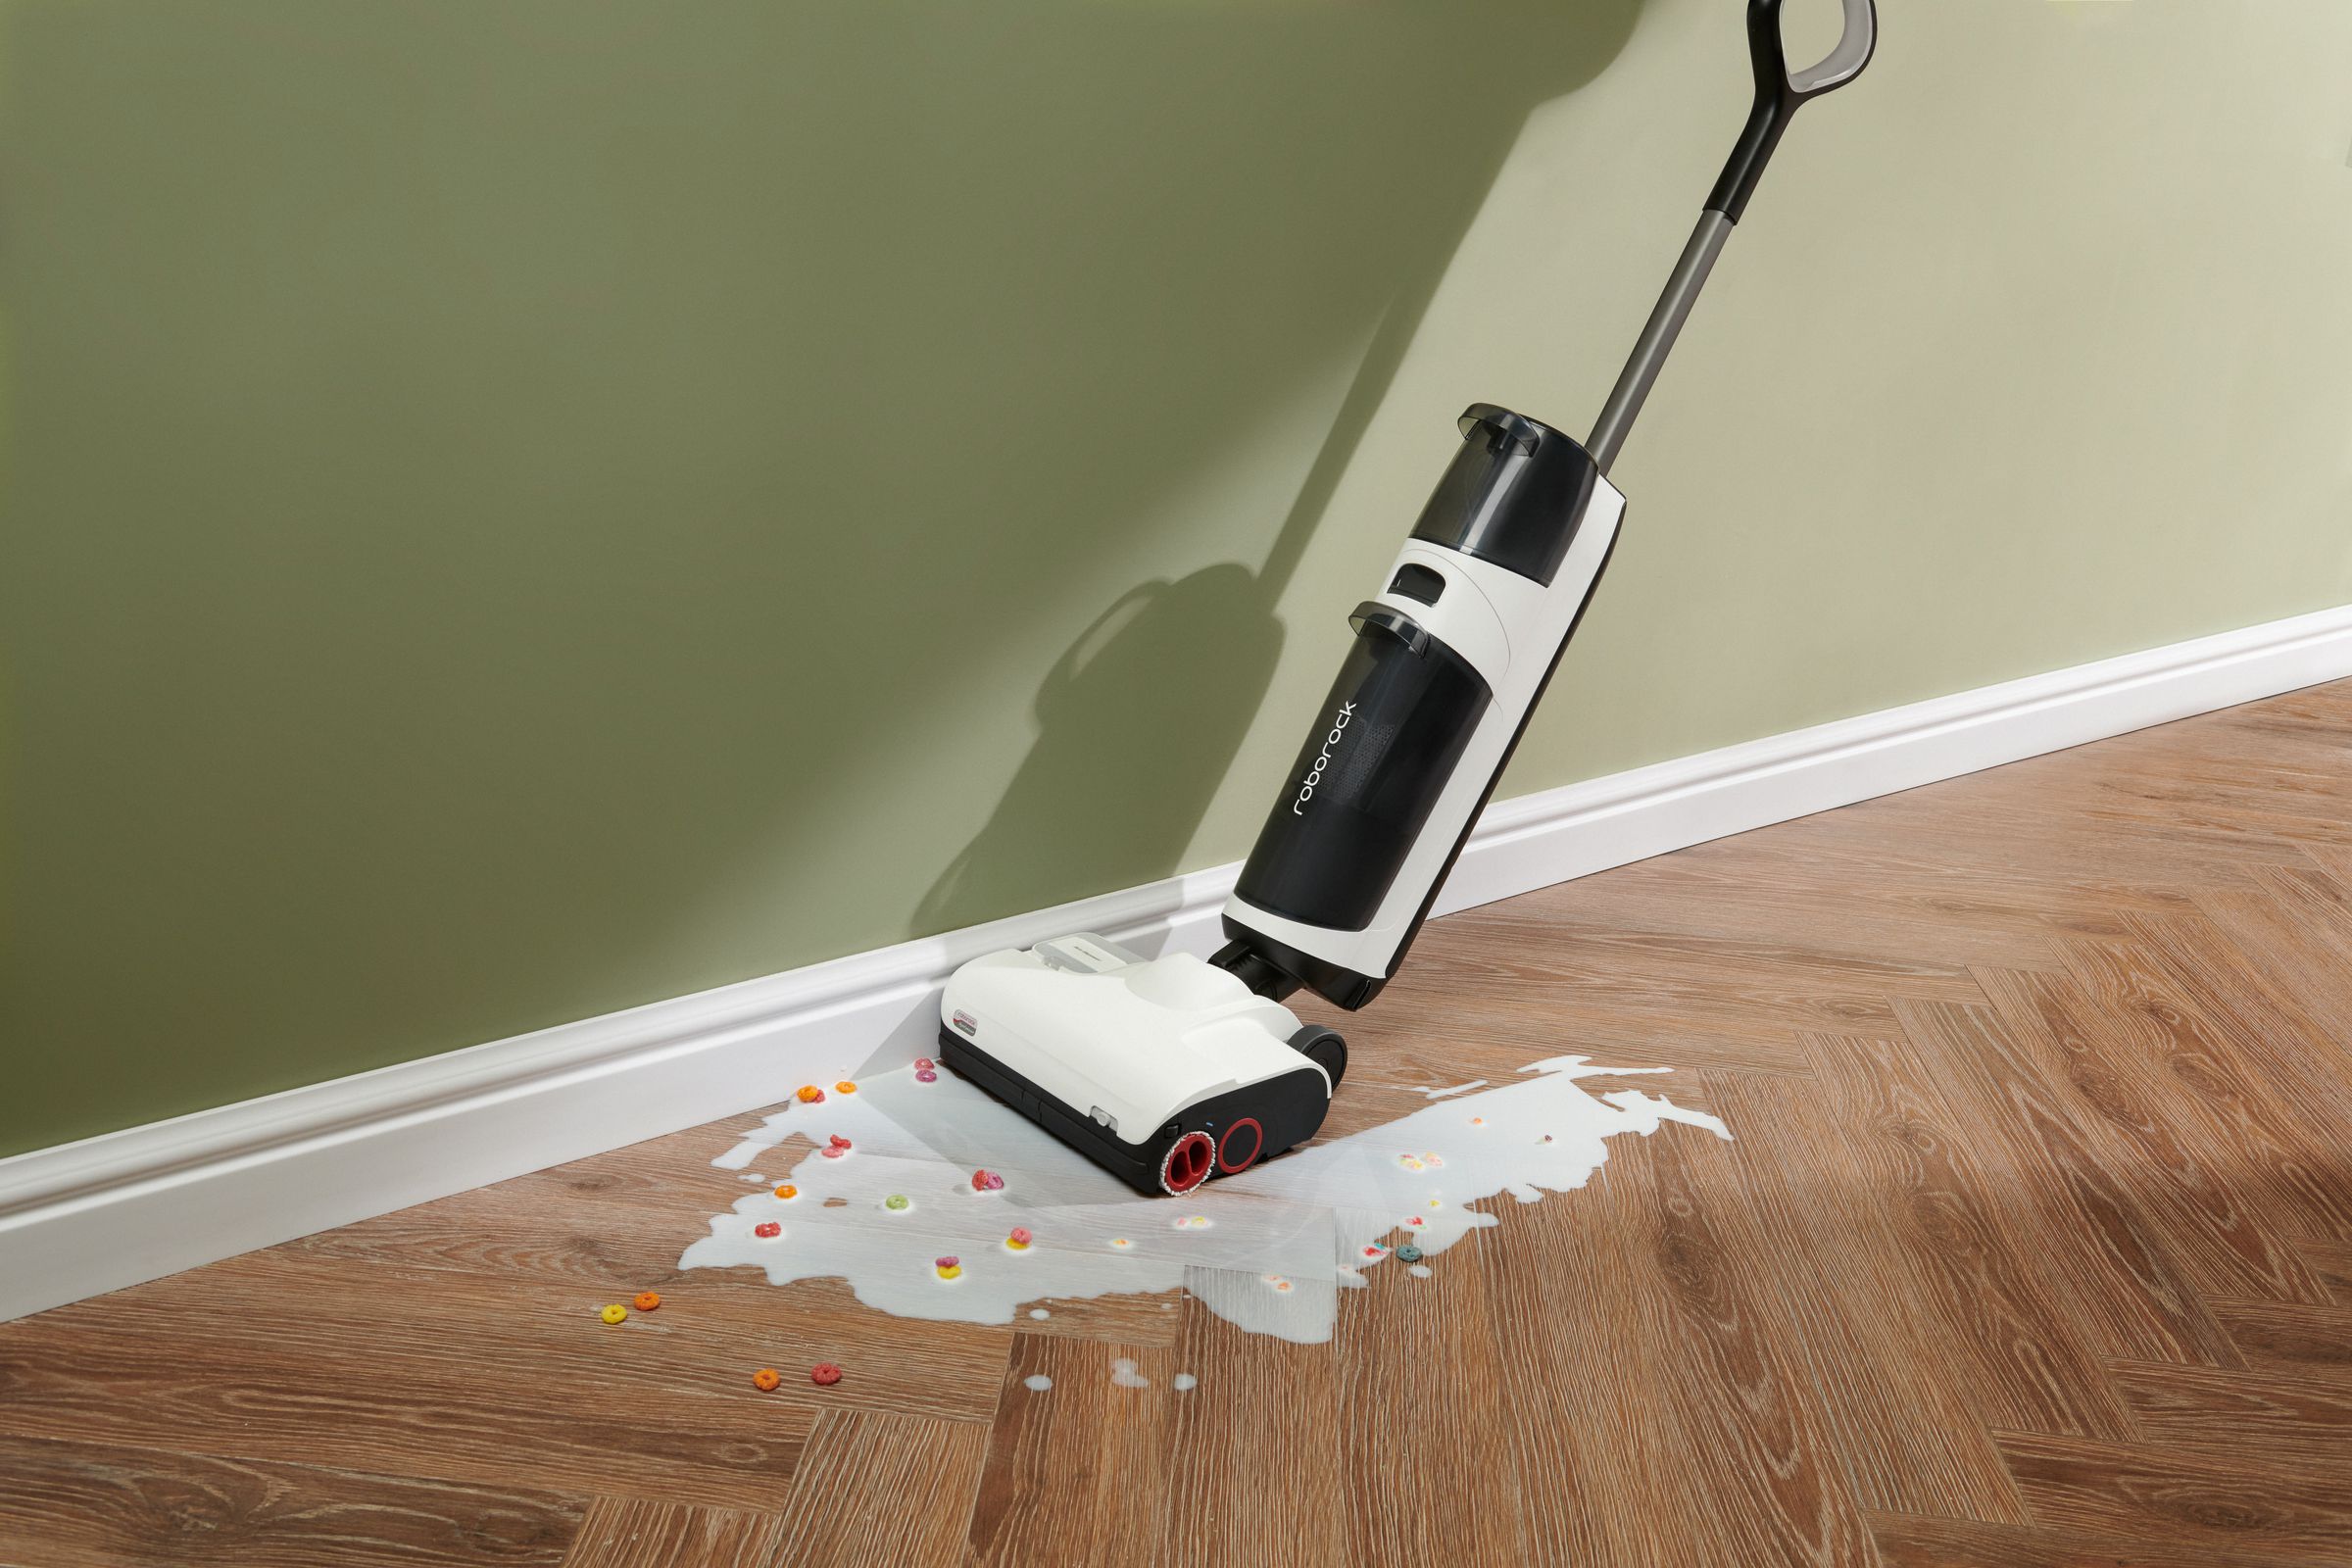 The Dyad Pro is a wet / dry vac that cleans itself.